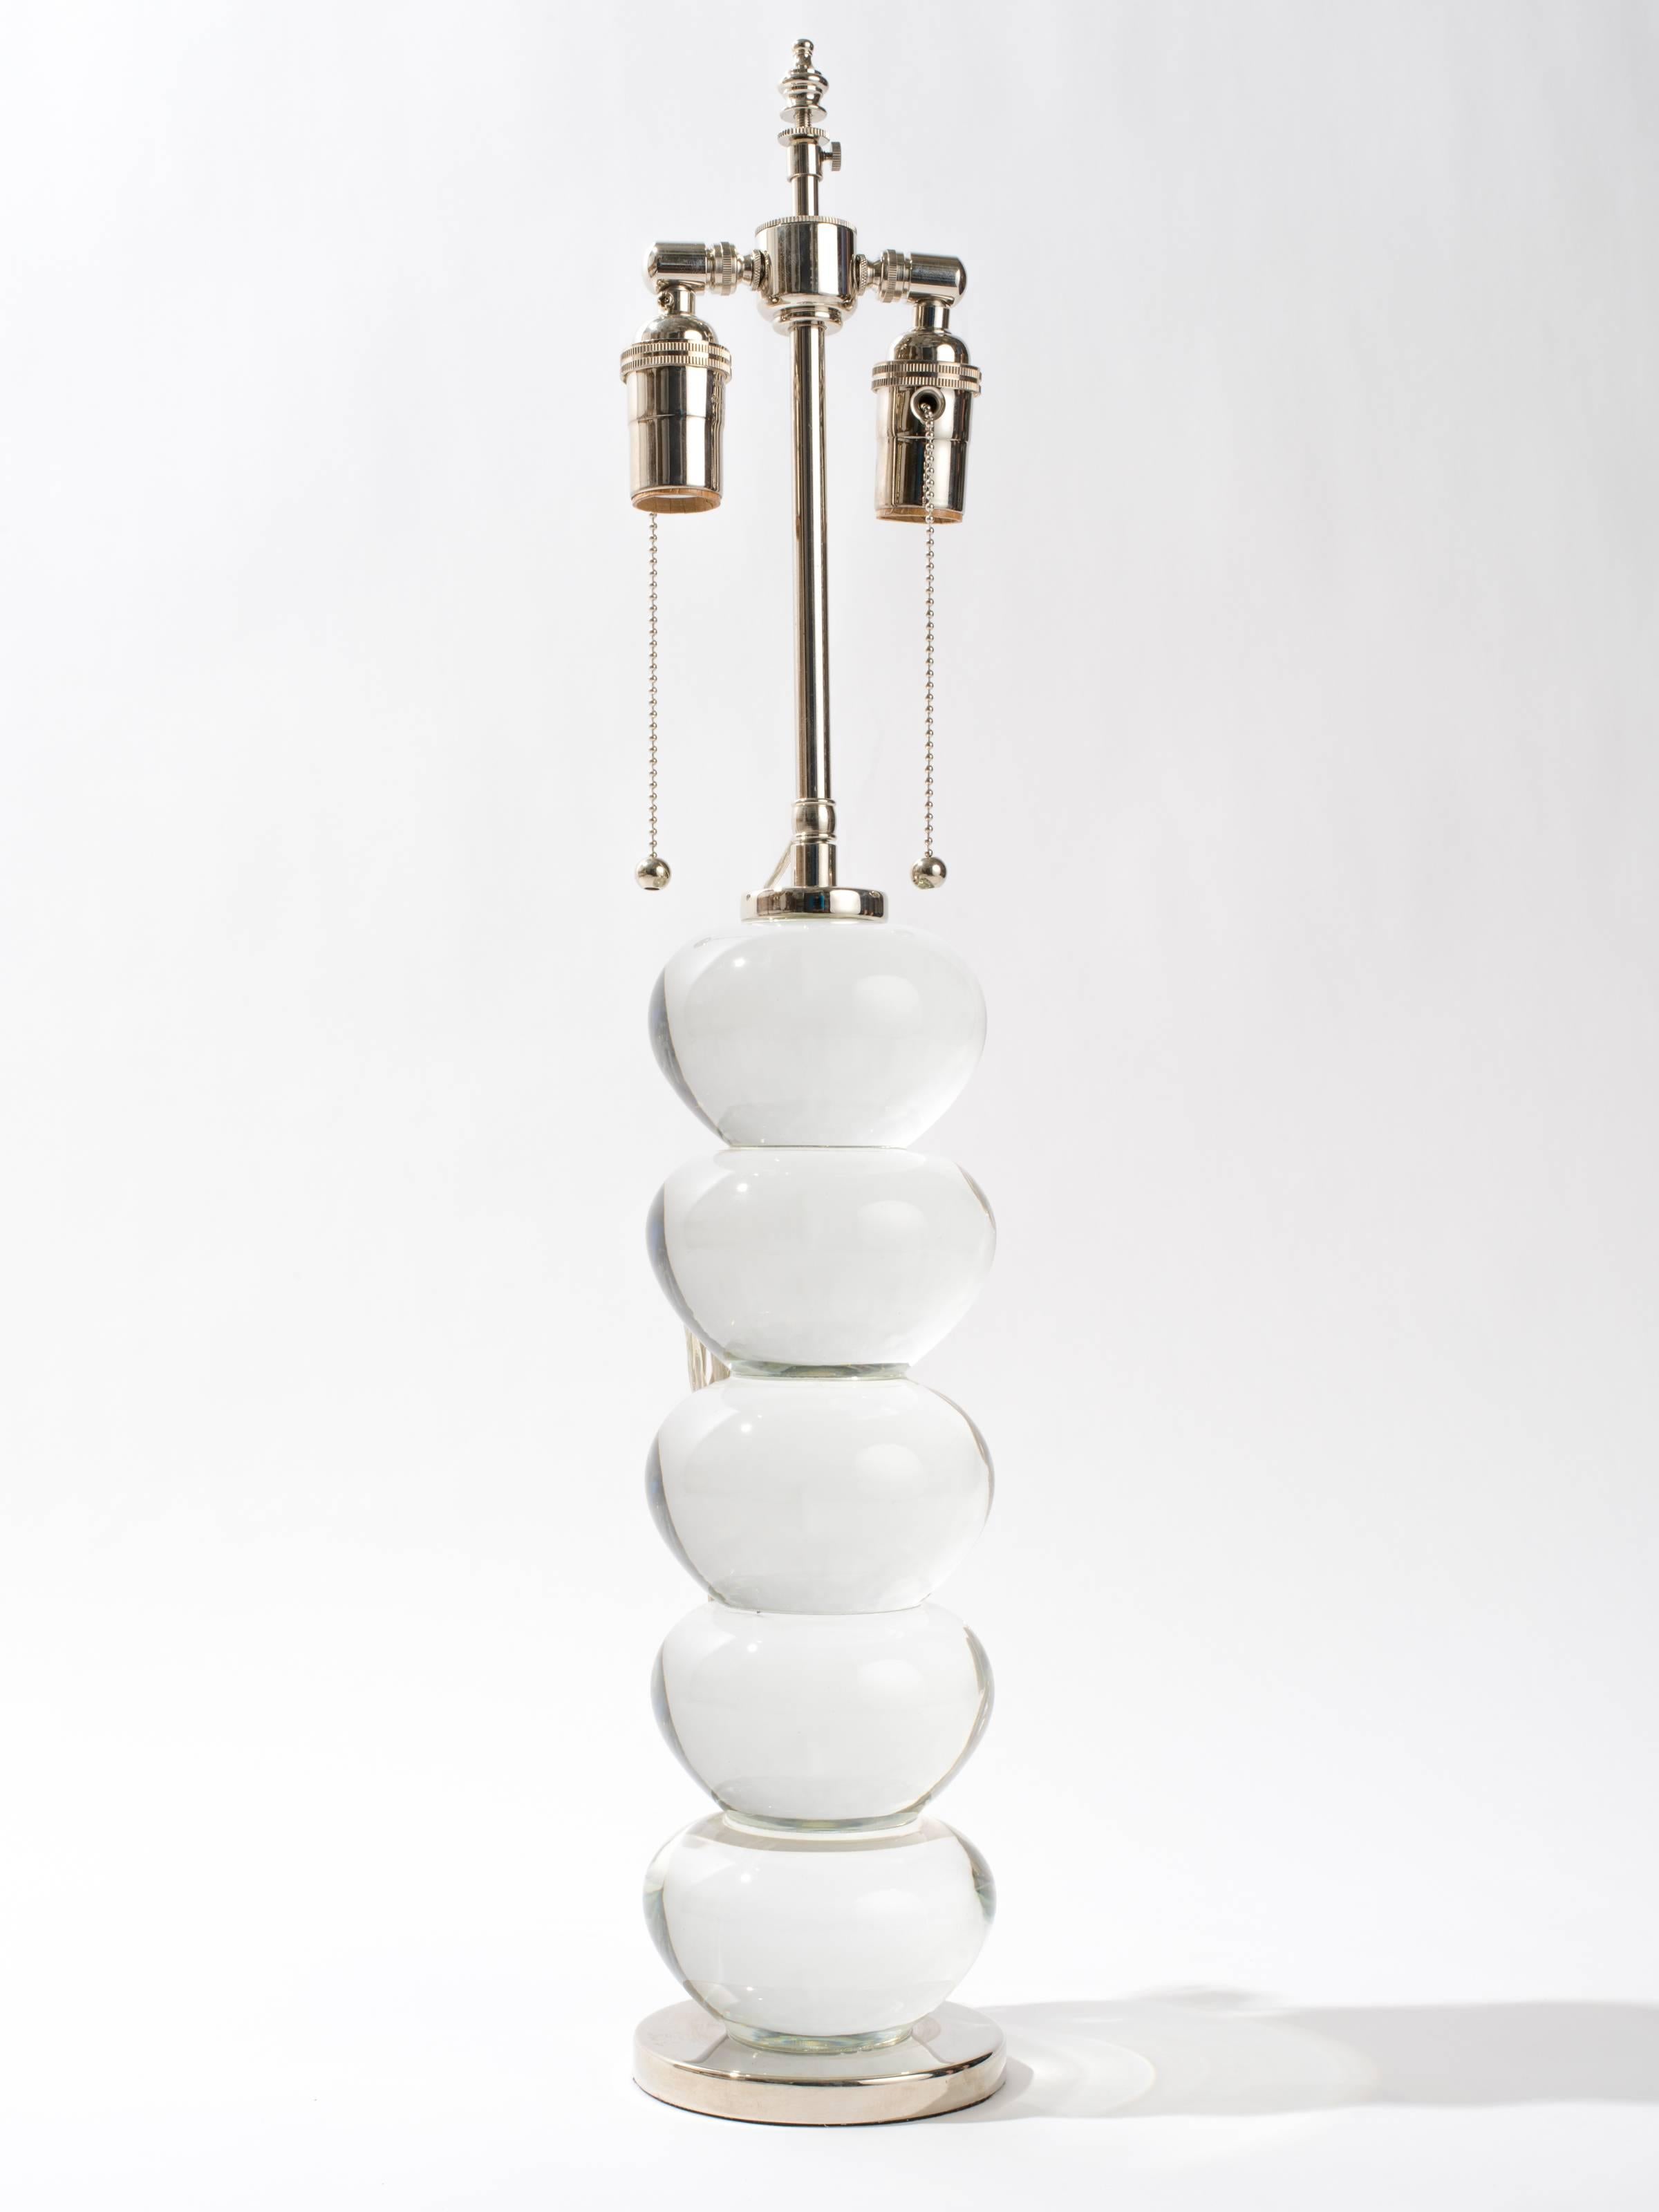 American Sculpture Amorphic Solid Glass Lamps For Sale